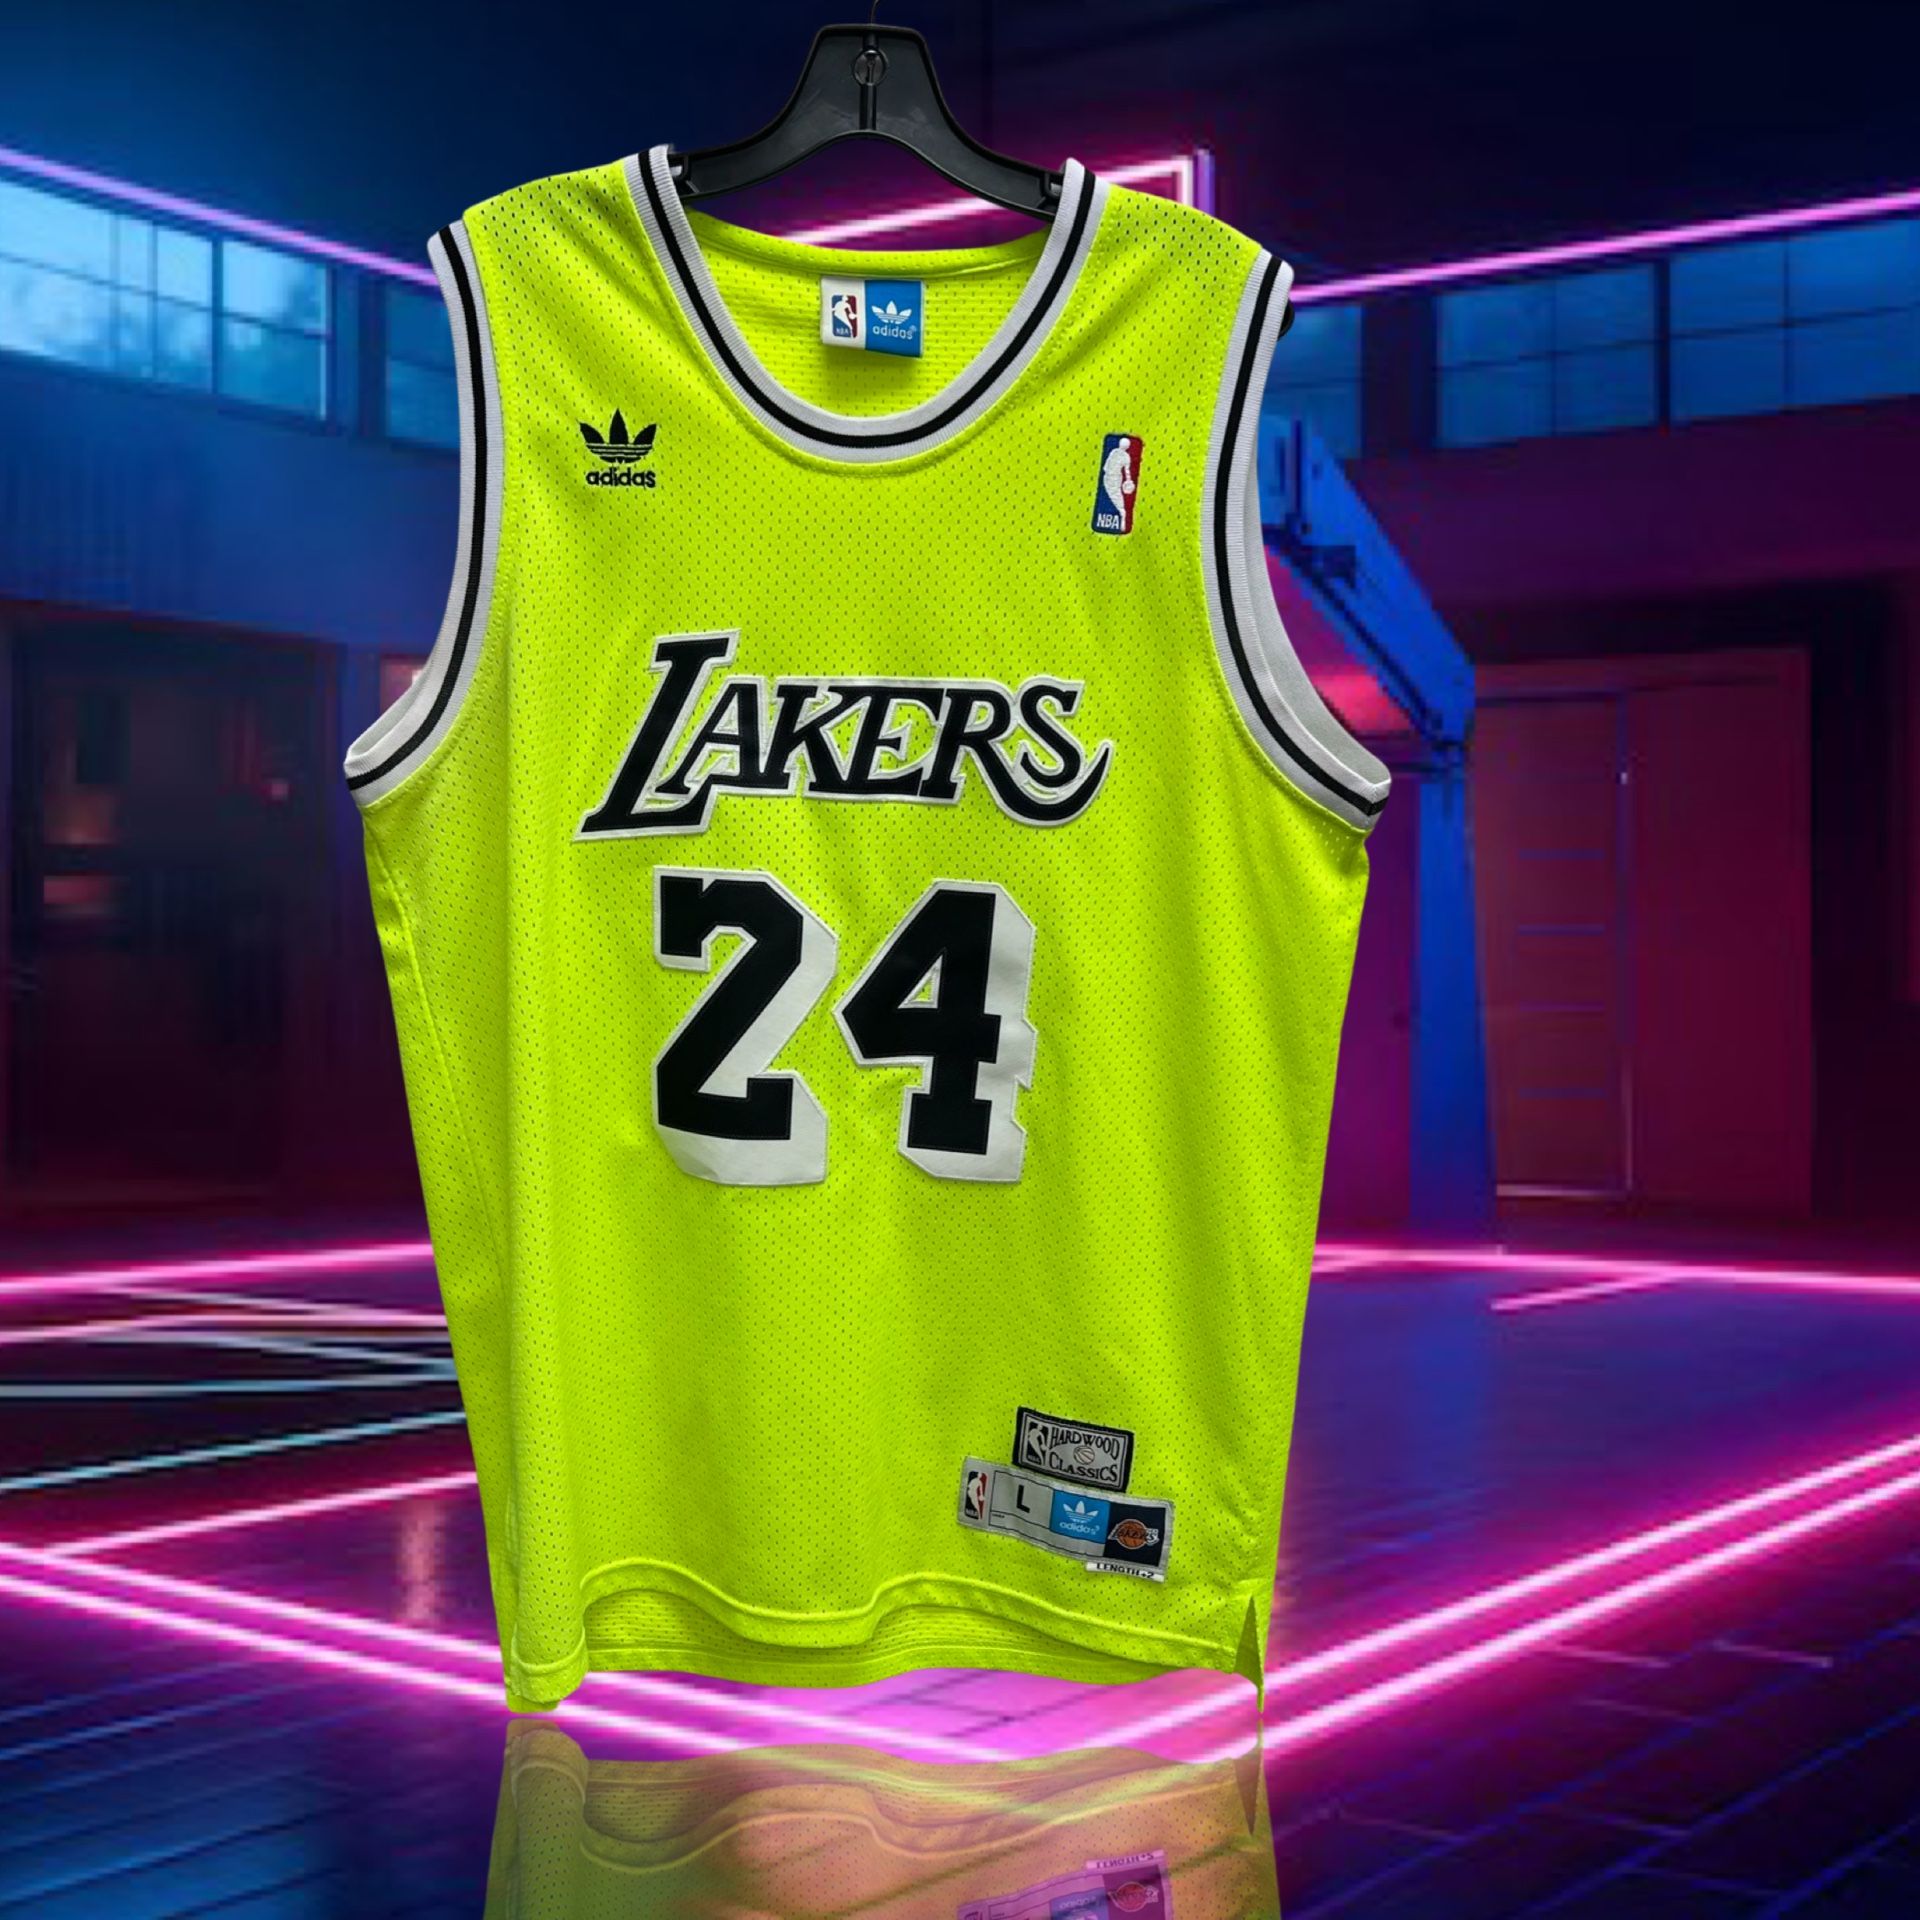 Lakers Jerseys for sale in Antioch, California